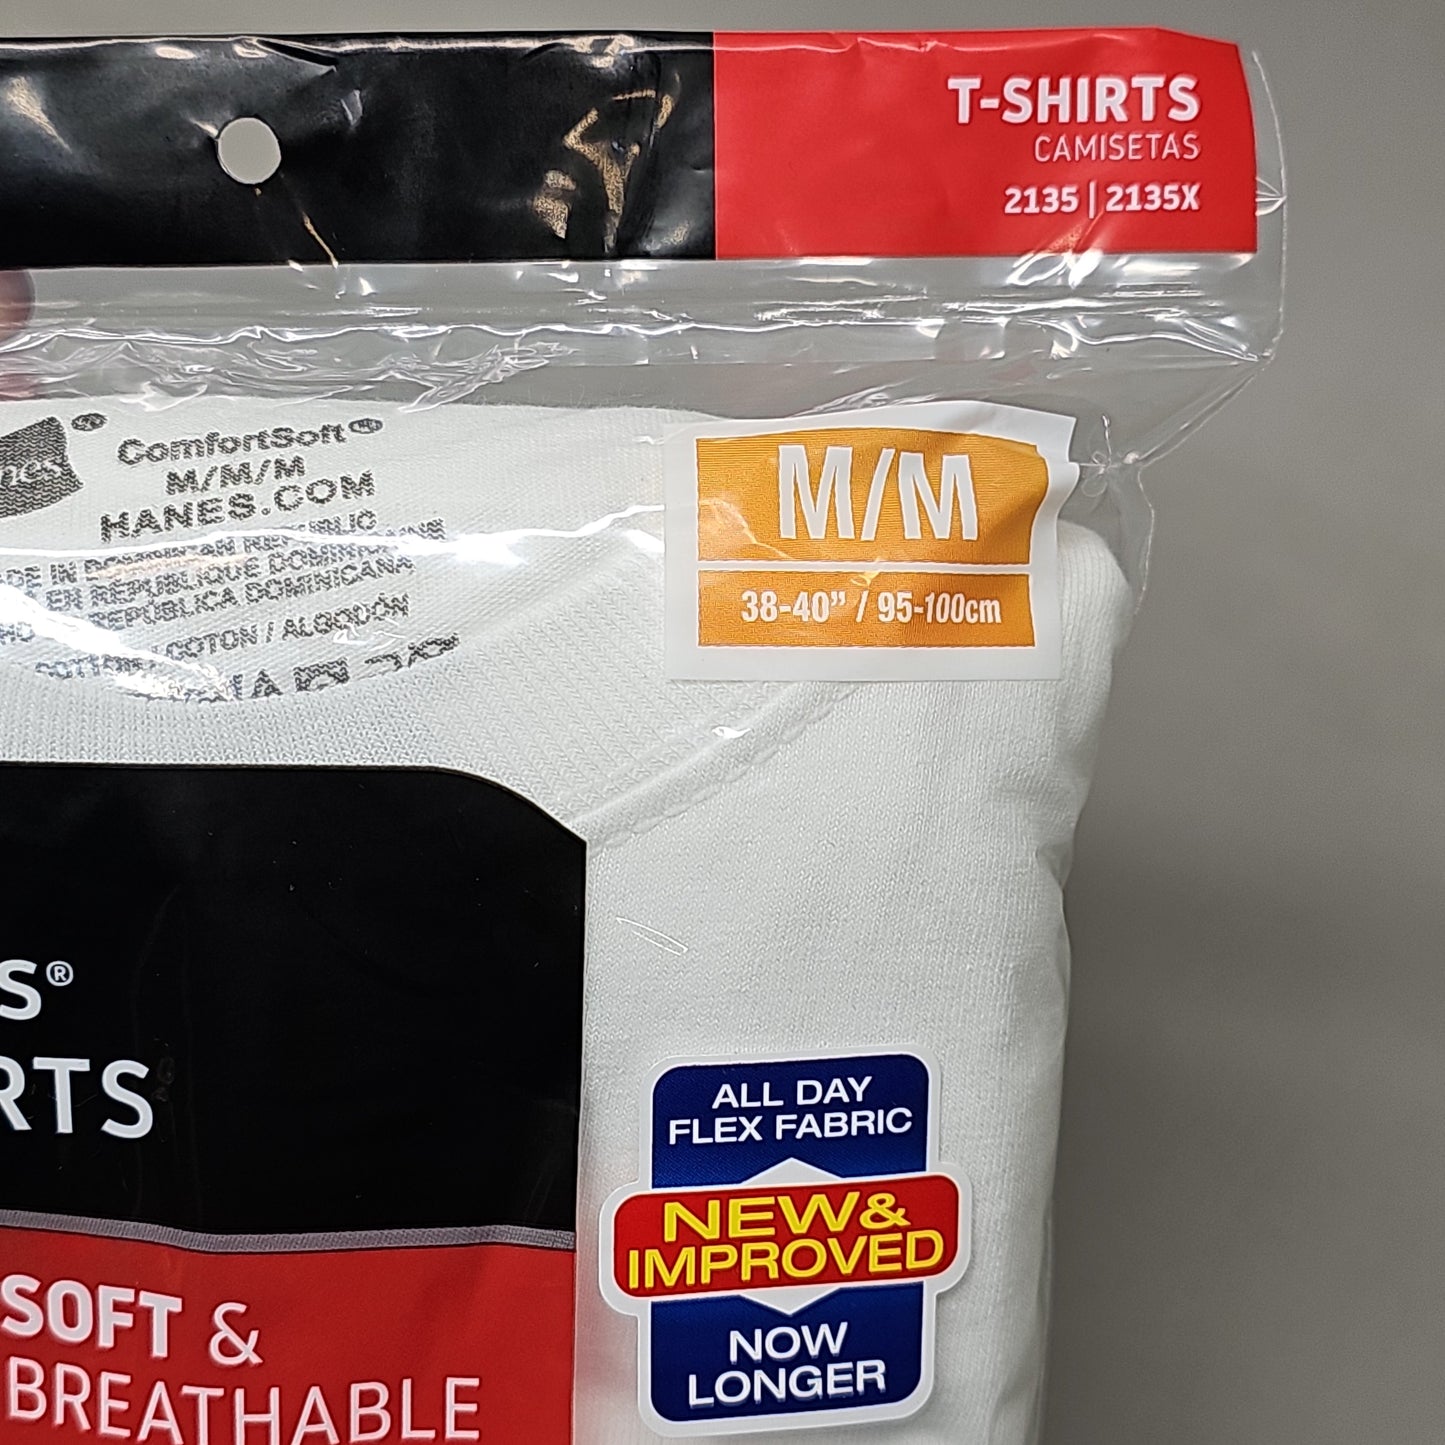 HANES Tagless T-Shirts Pack of 12 Men's Size M 38-40" White #2135 (New)